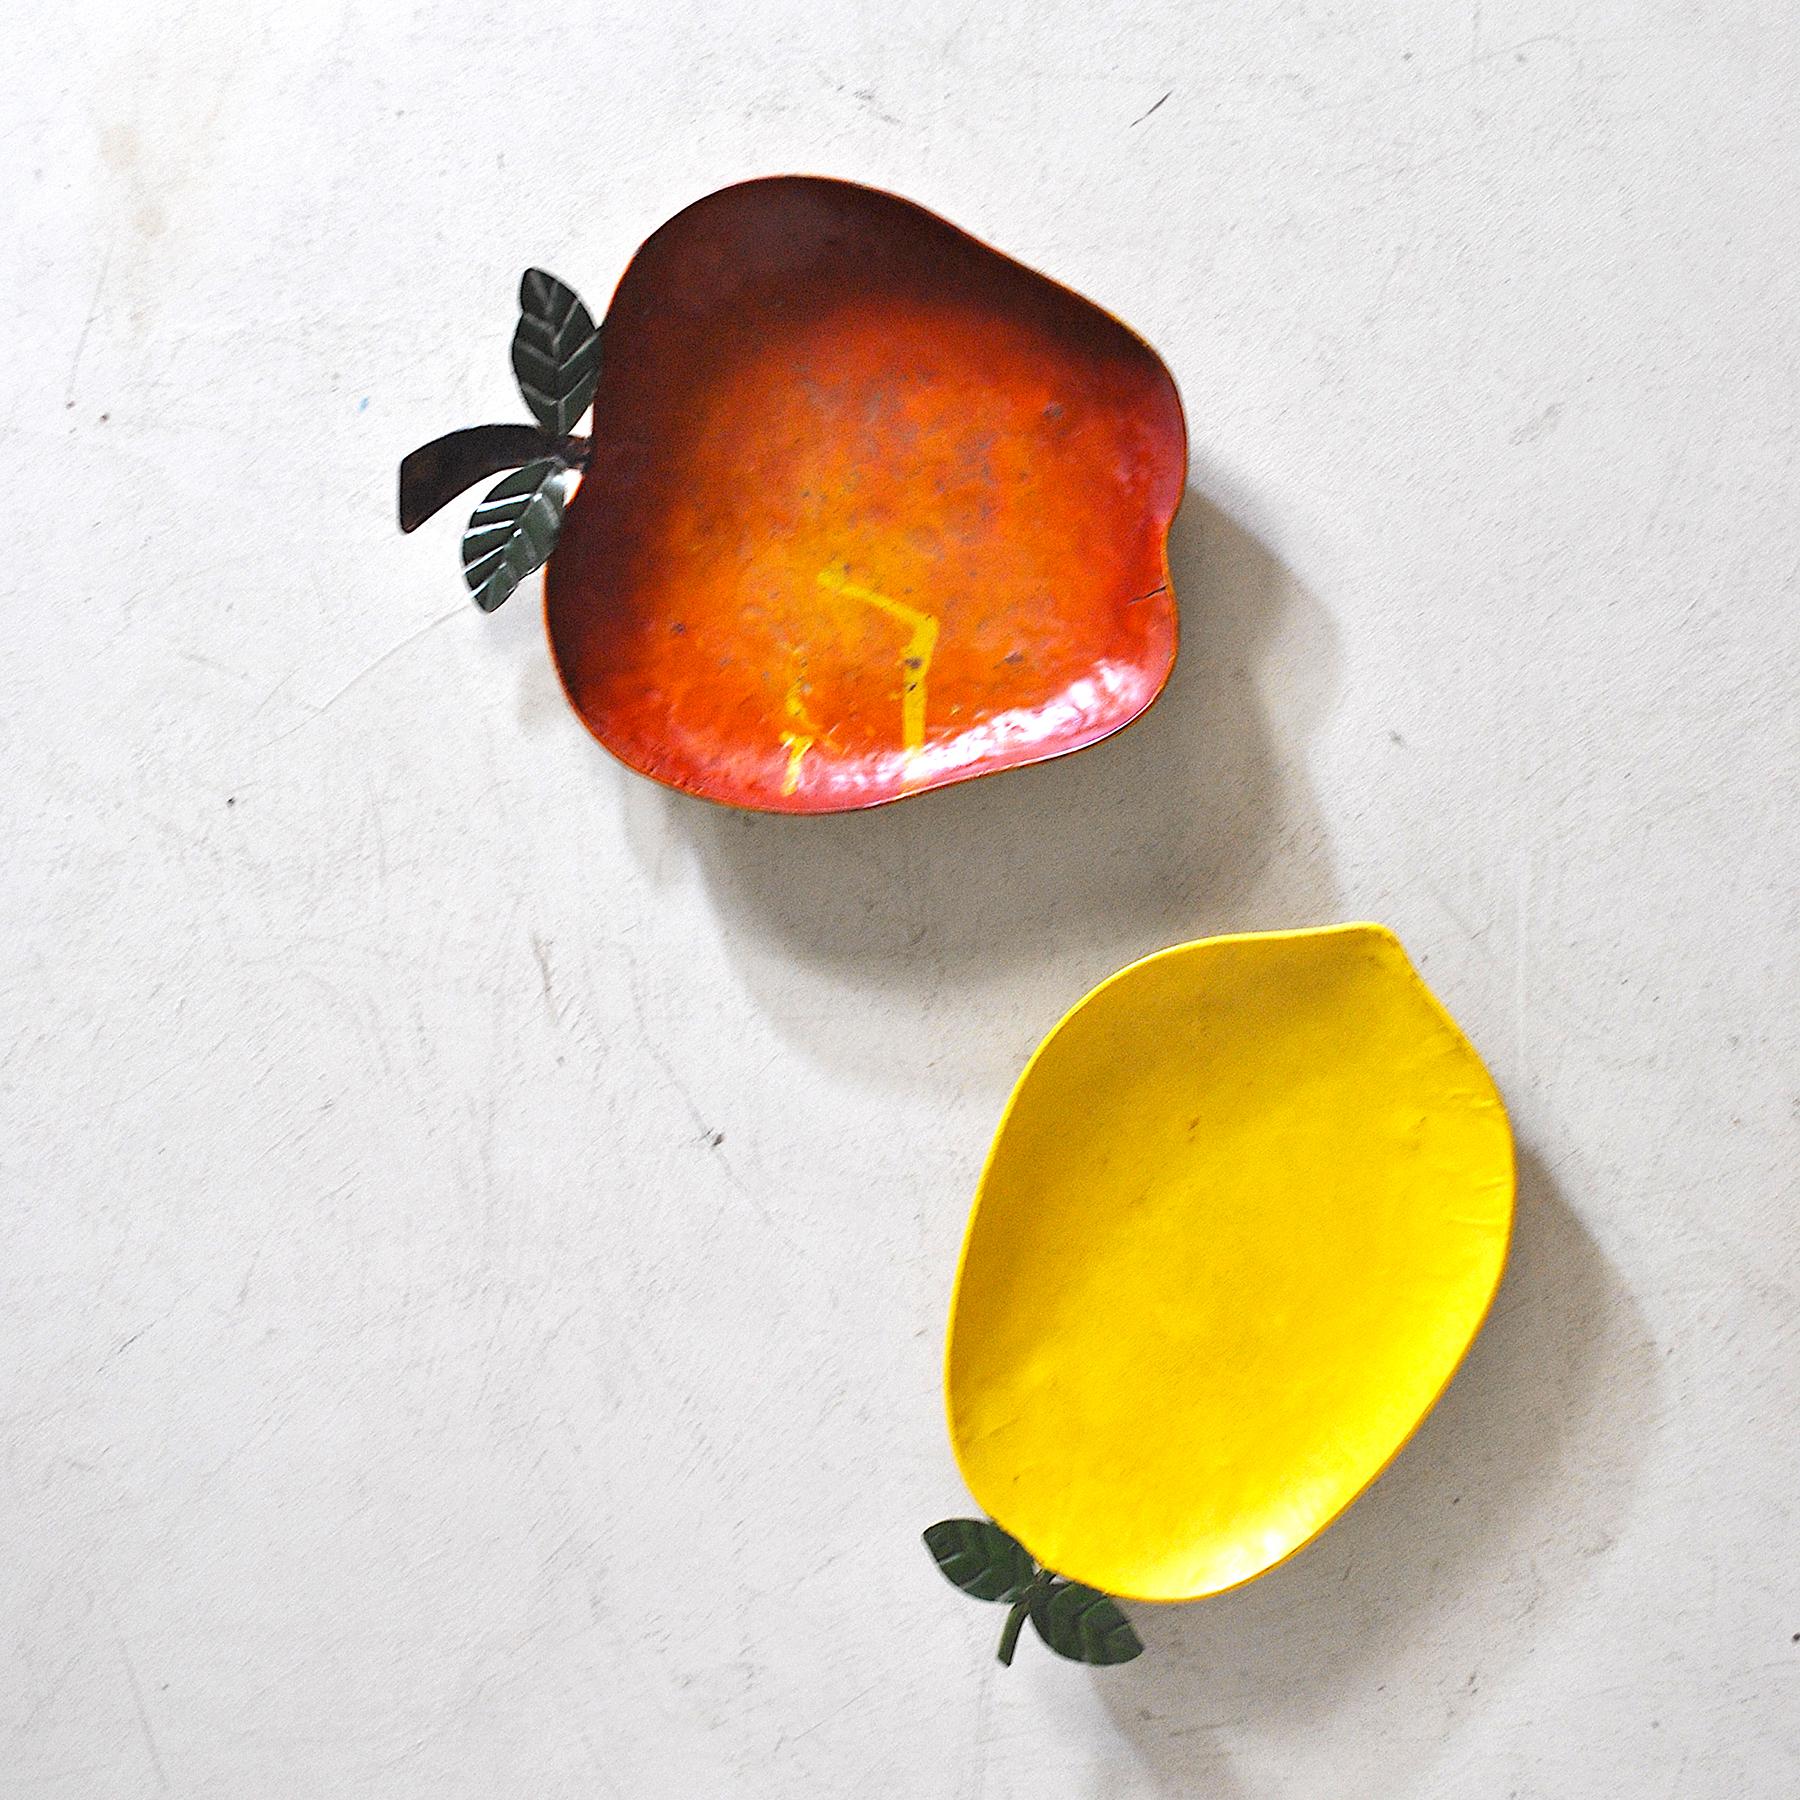 Mid-20th Century Set of 4 Fruit-Shaped Objects in Enameled Metal, Italian Manufacture For Sale